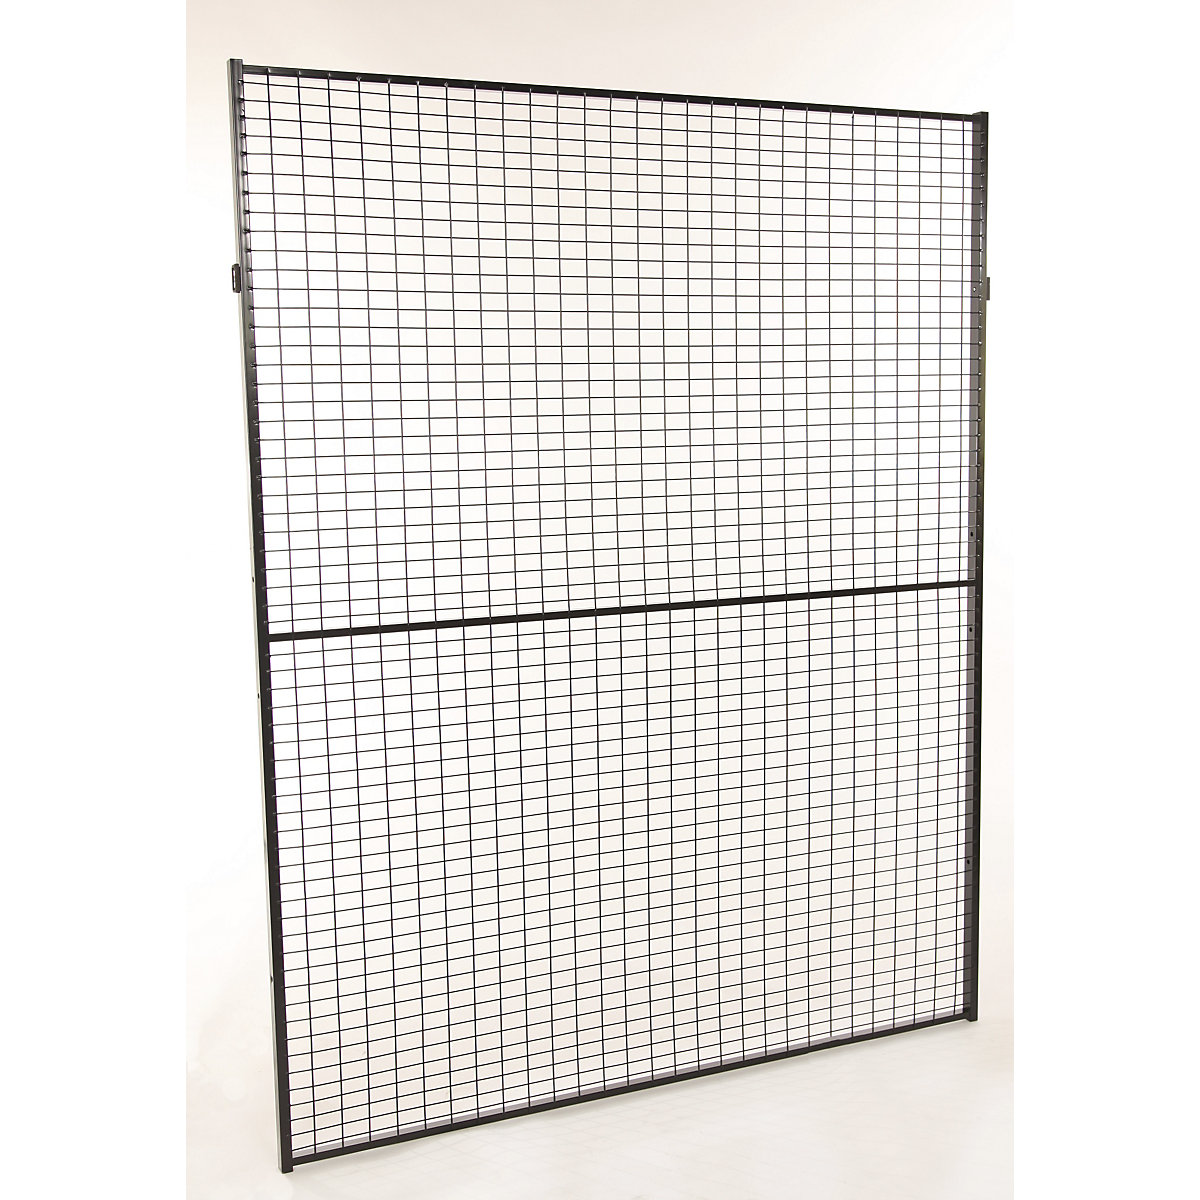 X-GUARD CLASSIC machine protective fencing, wall section – Axelent, height 2200 mm, width 1500 mm-6